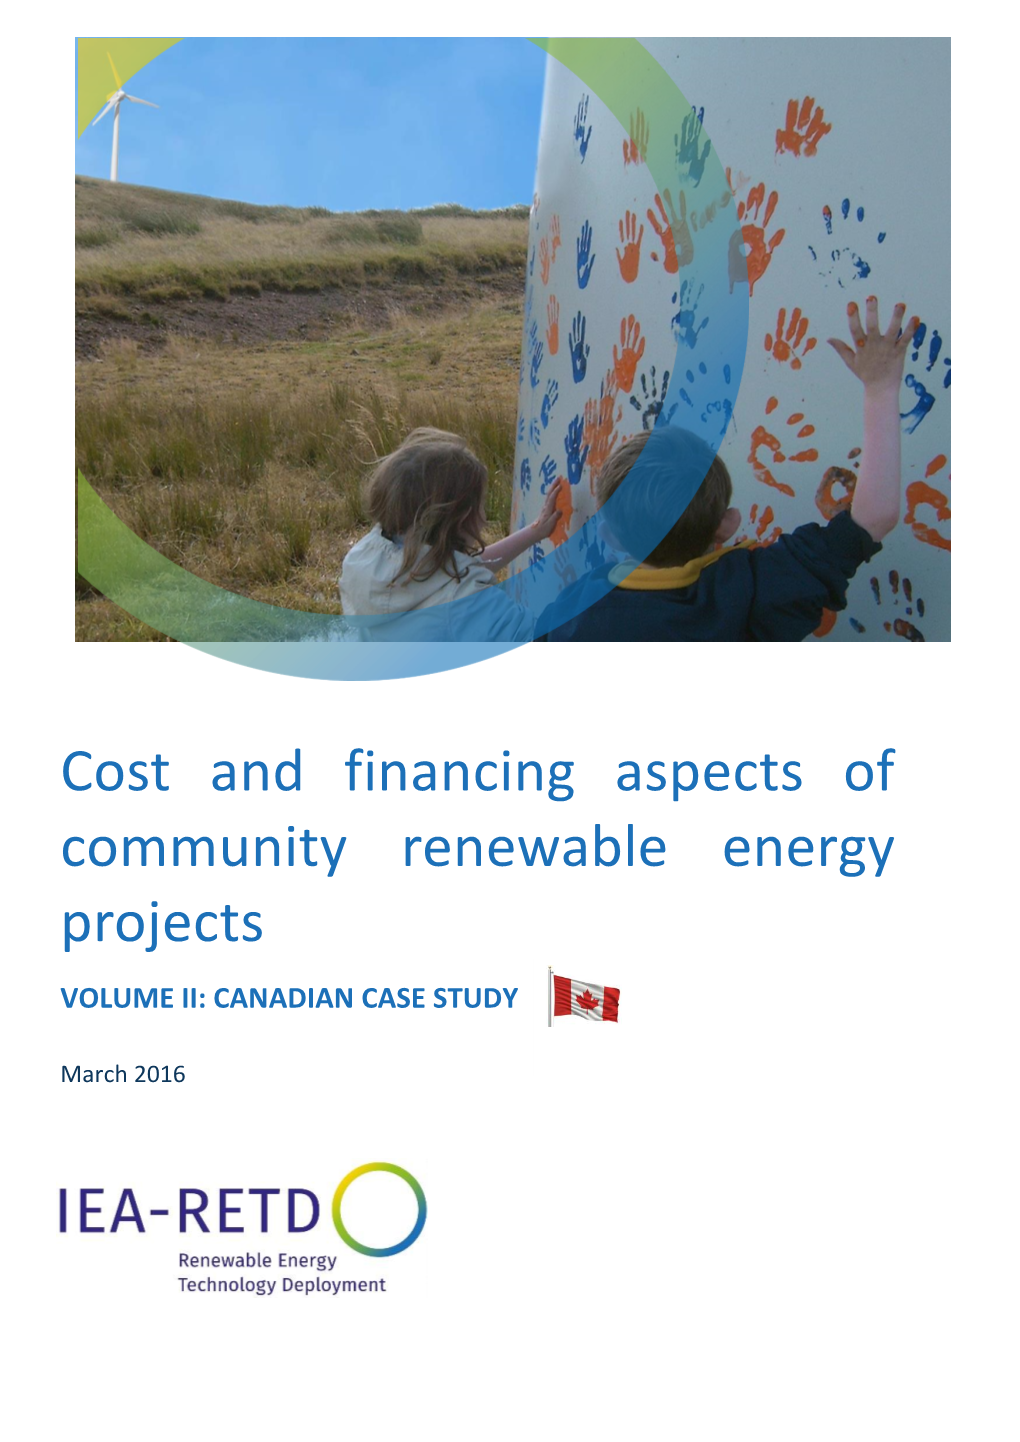 Cost and Financing Aspects of Community Renewable Energy Projects VOLUME II: CANADIAN CASE STUDY